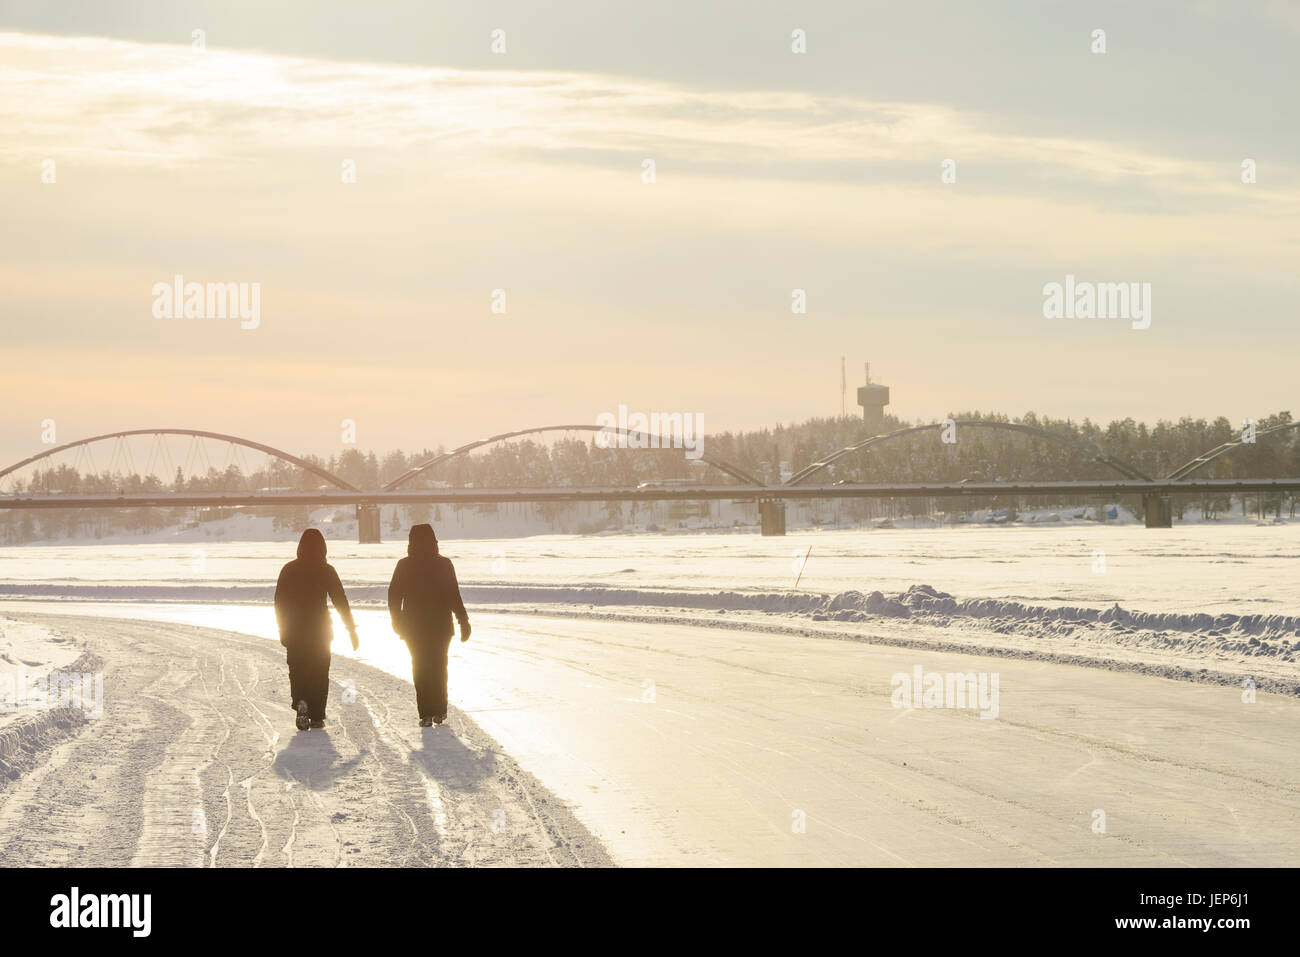 Silhouettes of people walking along frozen river Stock Photo